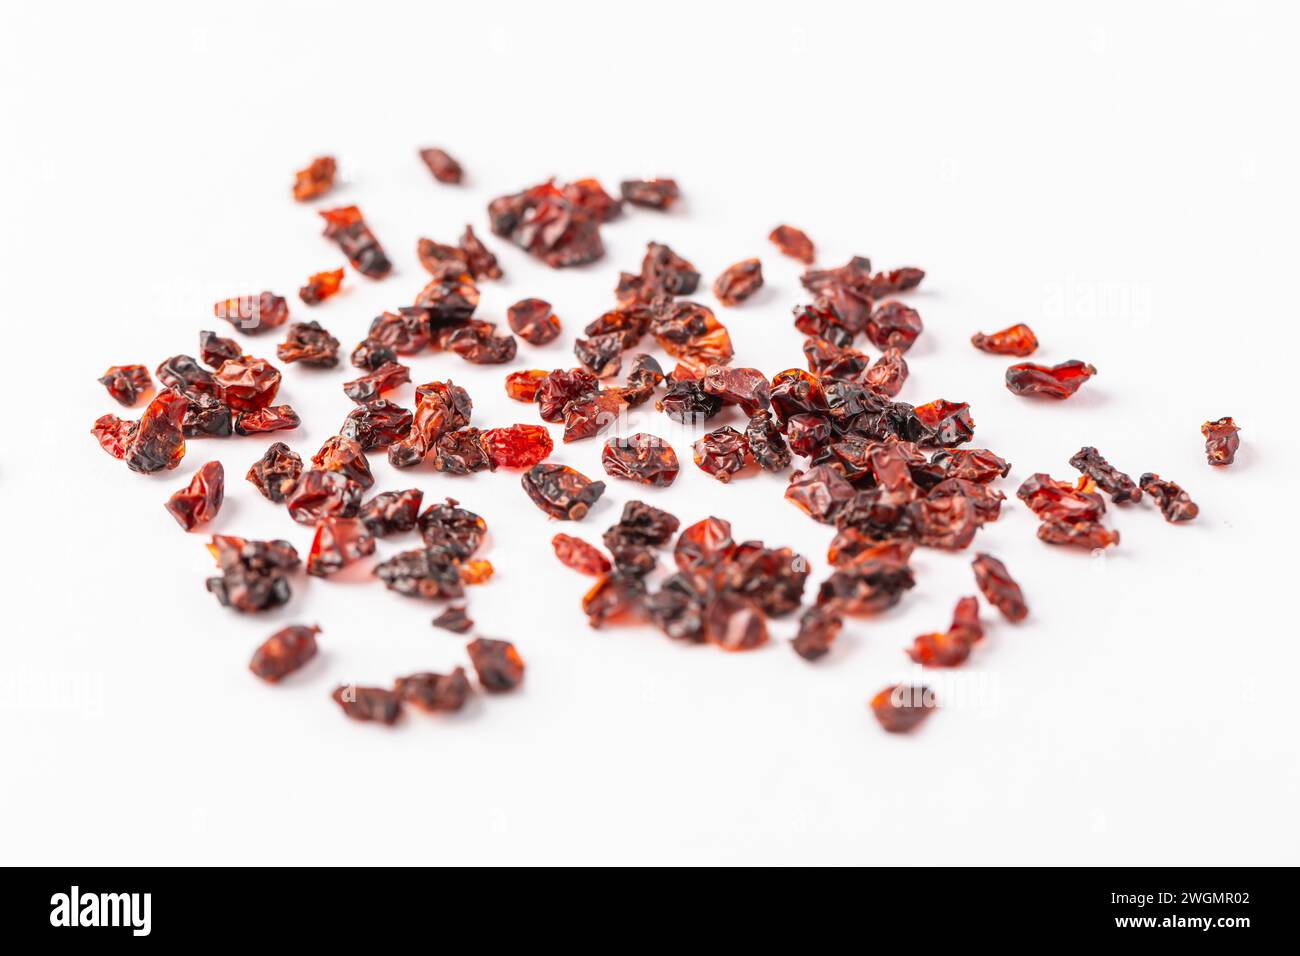 Pile of dried Berberis vulgaris, common barberry, European barberry or barberry. Edible herbal medicinal red fruit plant. Stock Photo